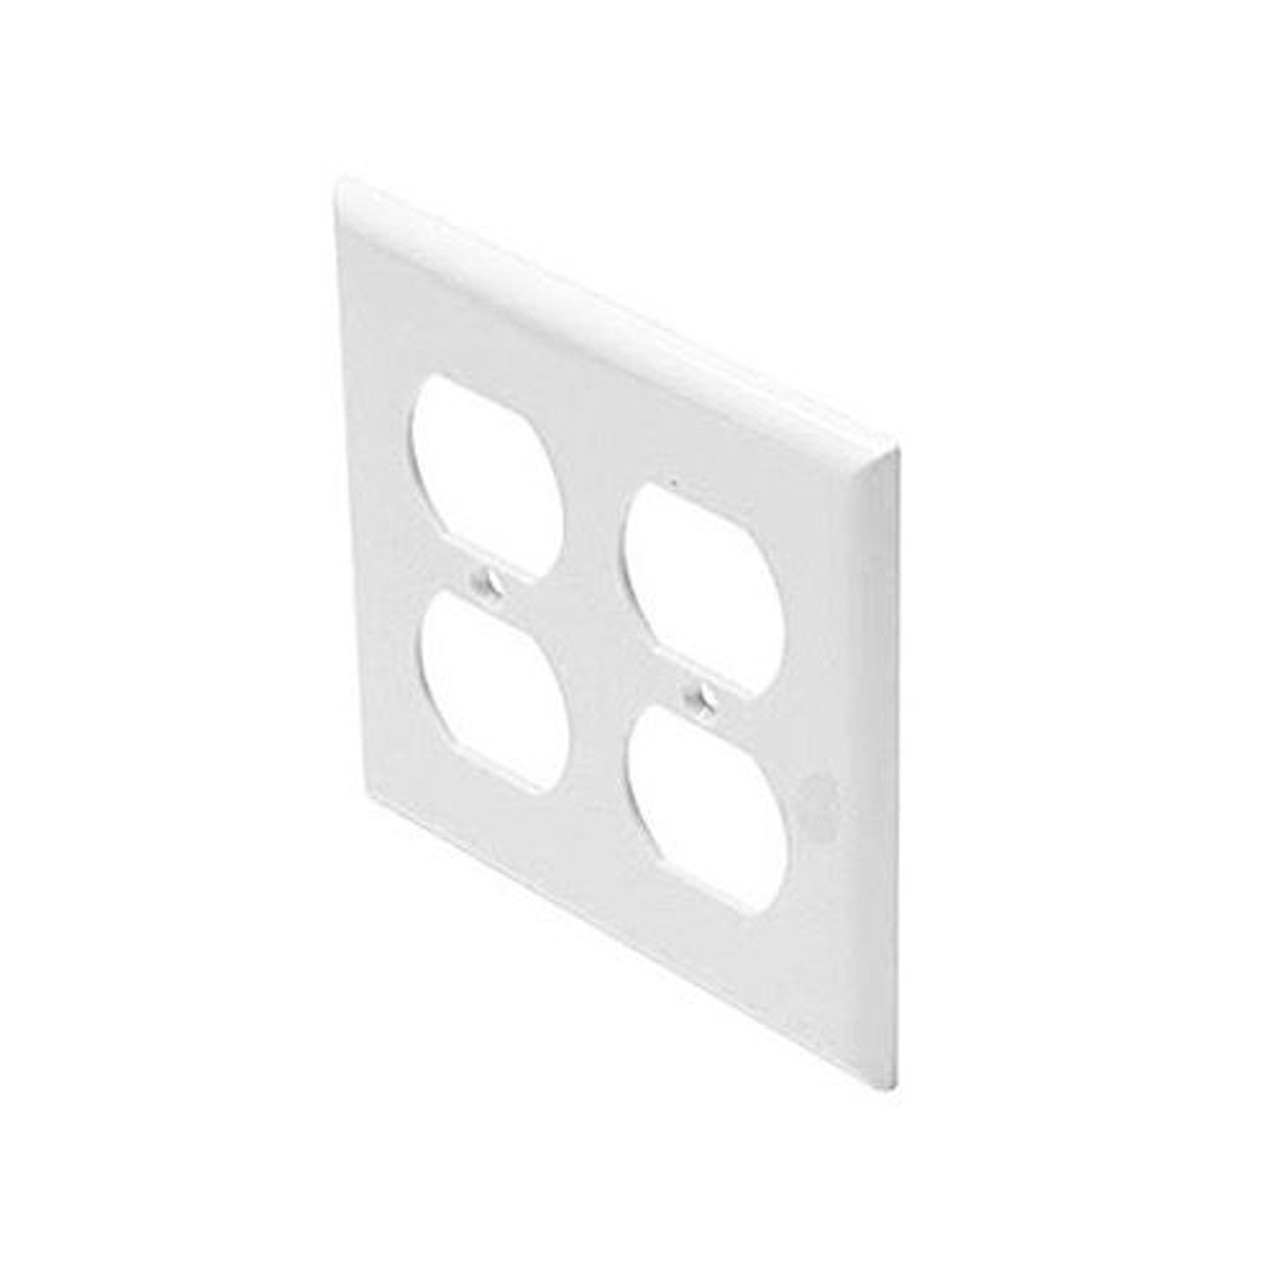 Steren 310-822WH Dual Gang Duplex Receptacle Wall Plate White UL Electrical Outlet Duplex Plug, Part # 310822-WH